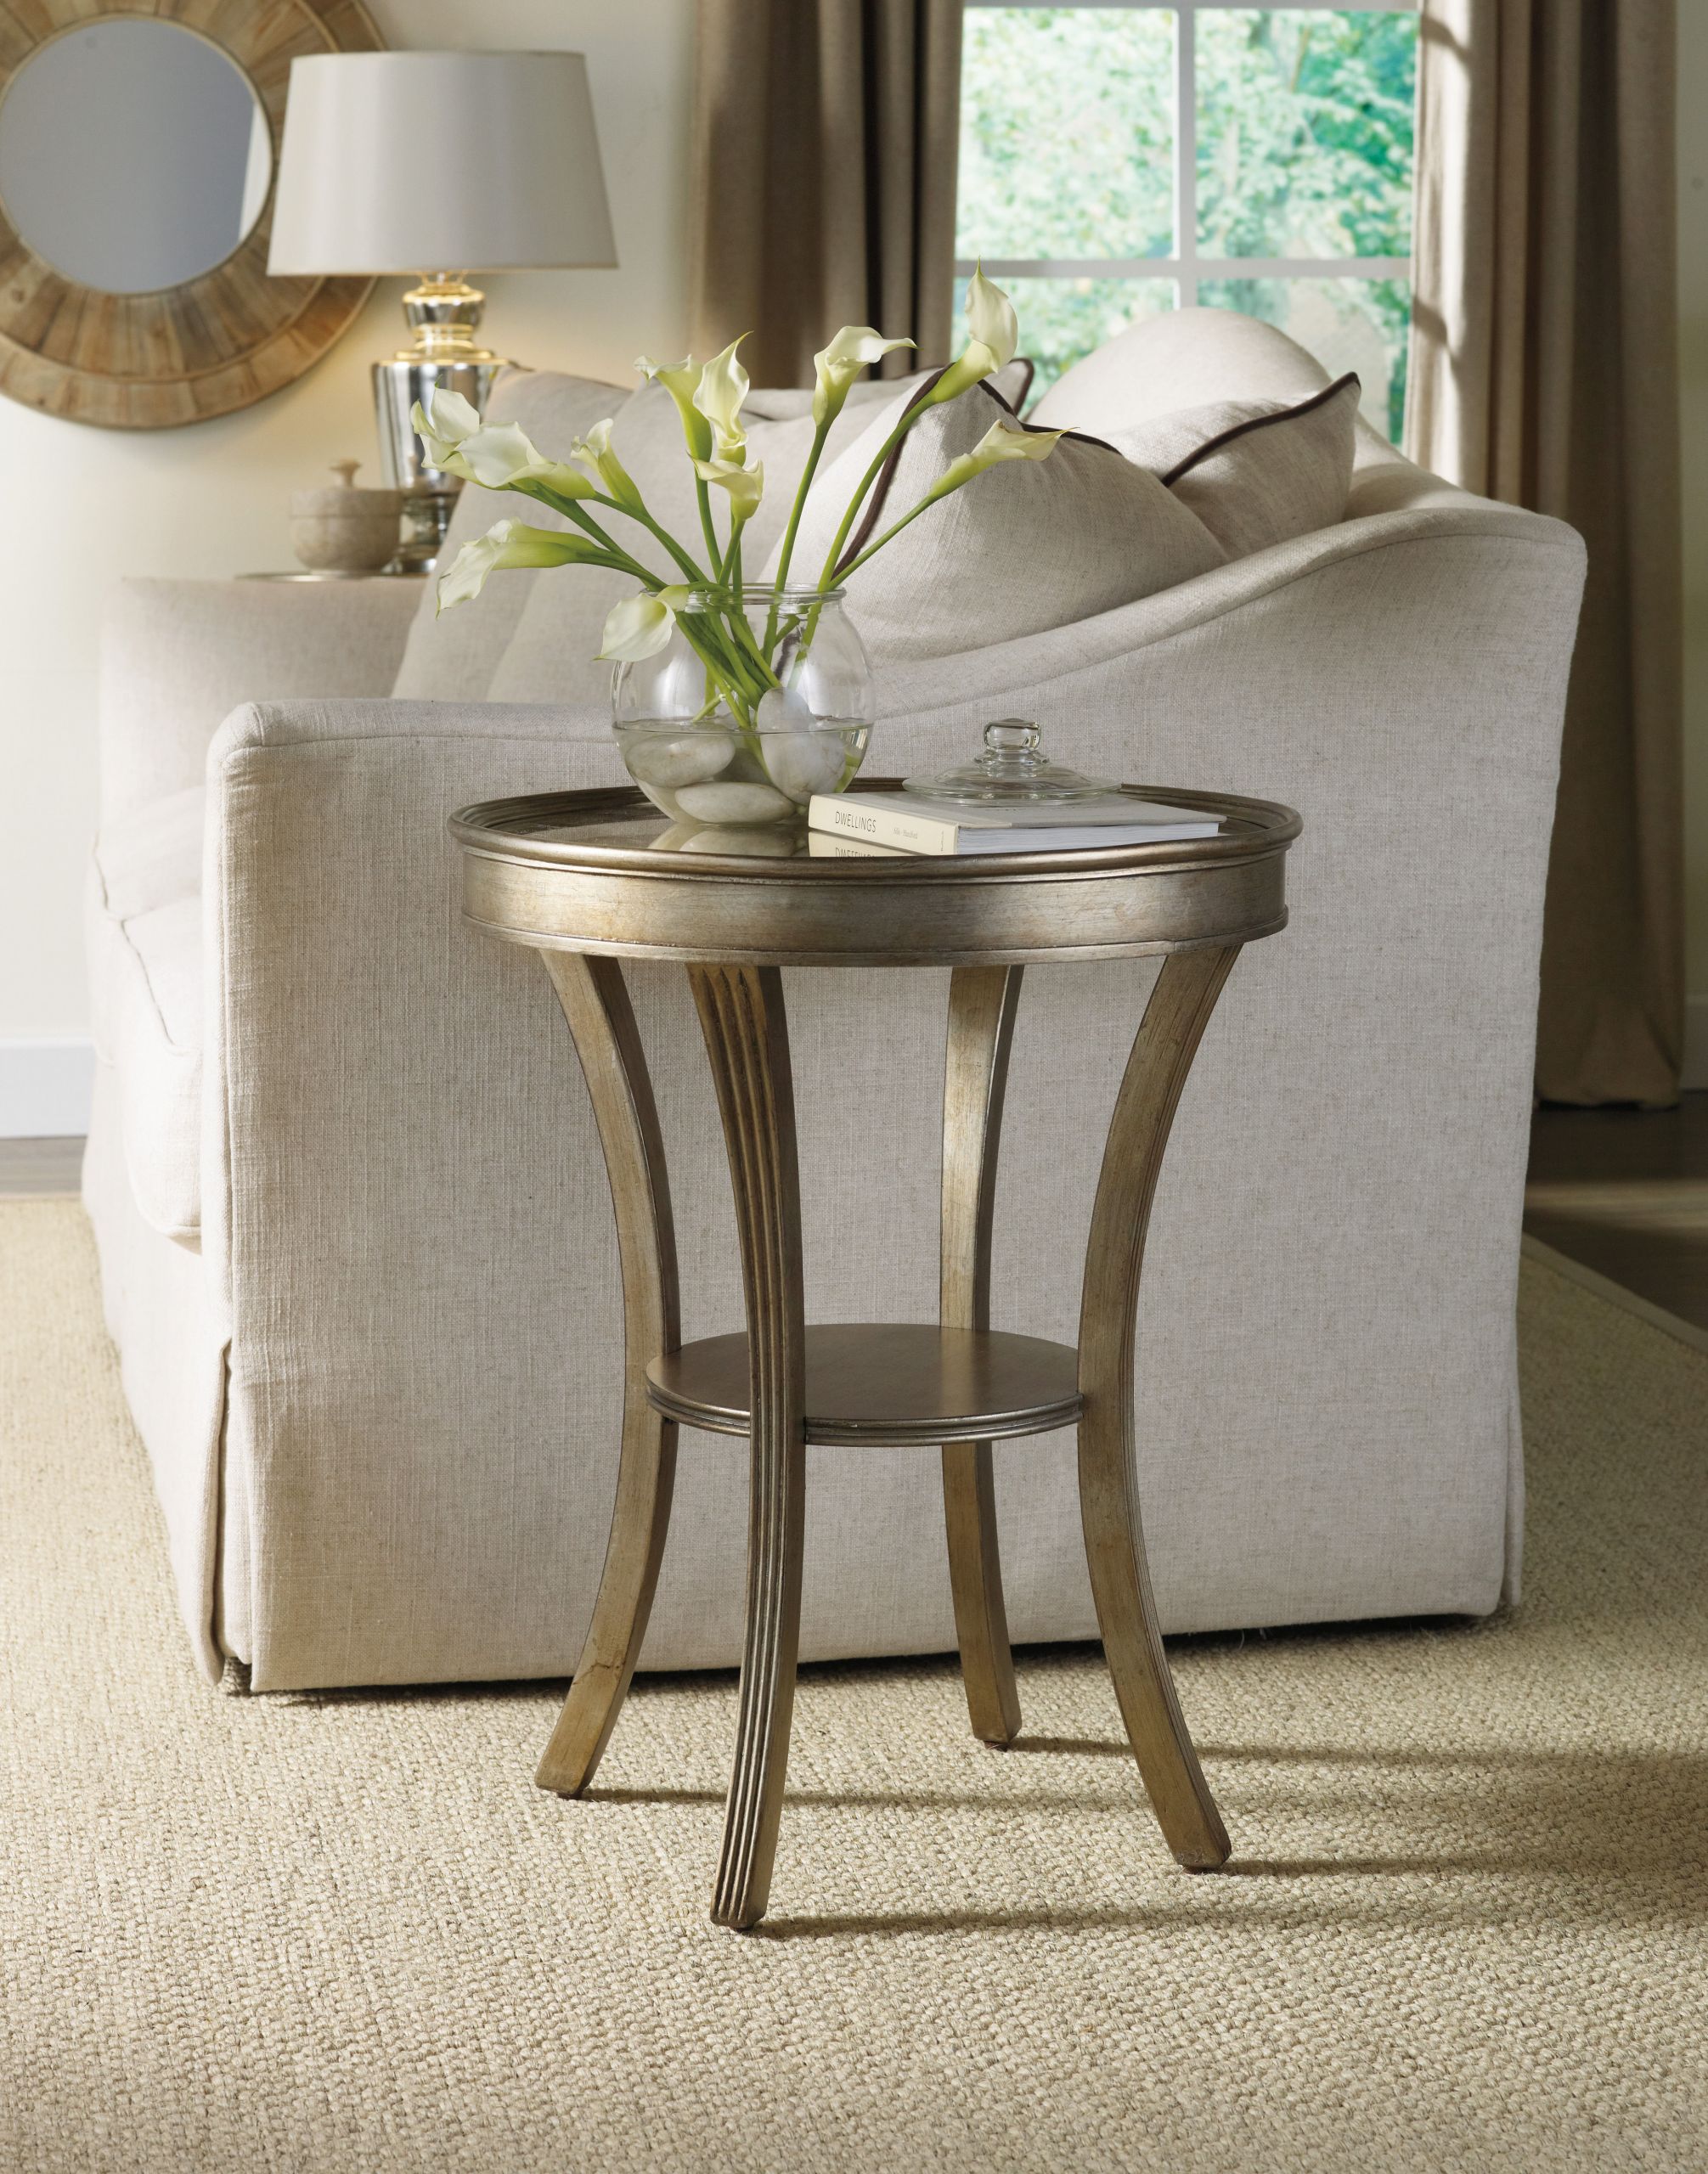 Accent Tables For Living Room
 Hooker Furniture Living Room Sanctuary Round Mirrored